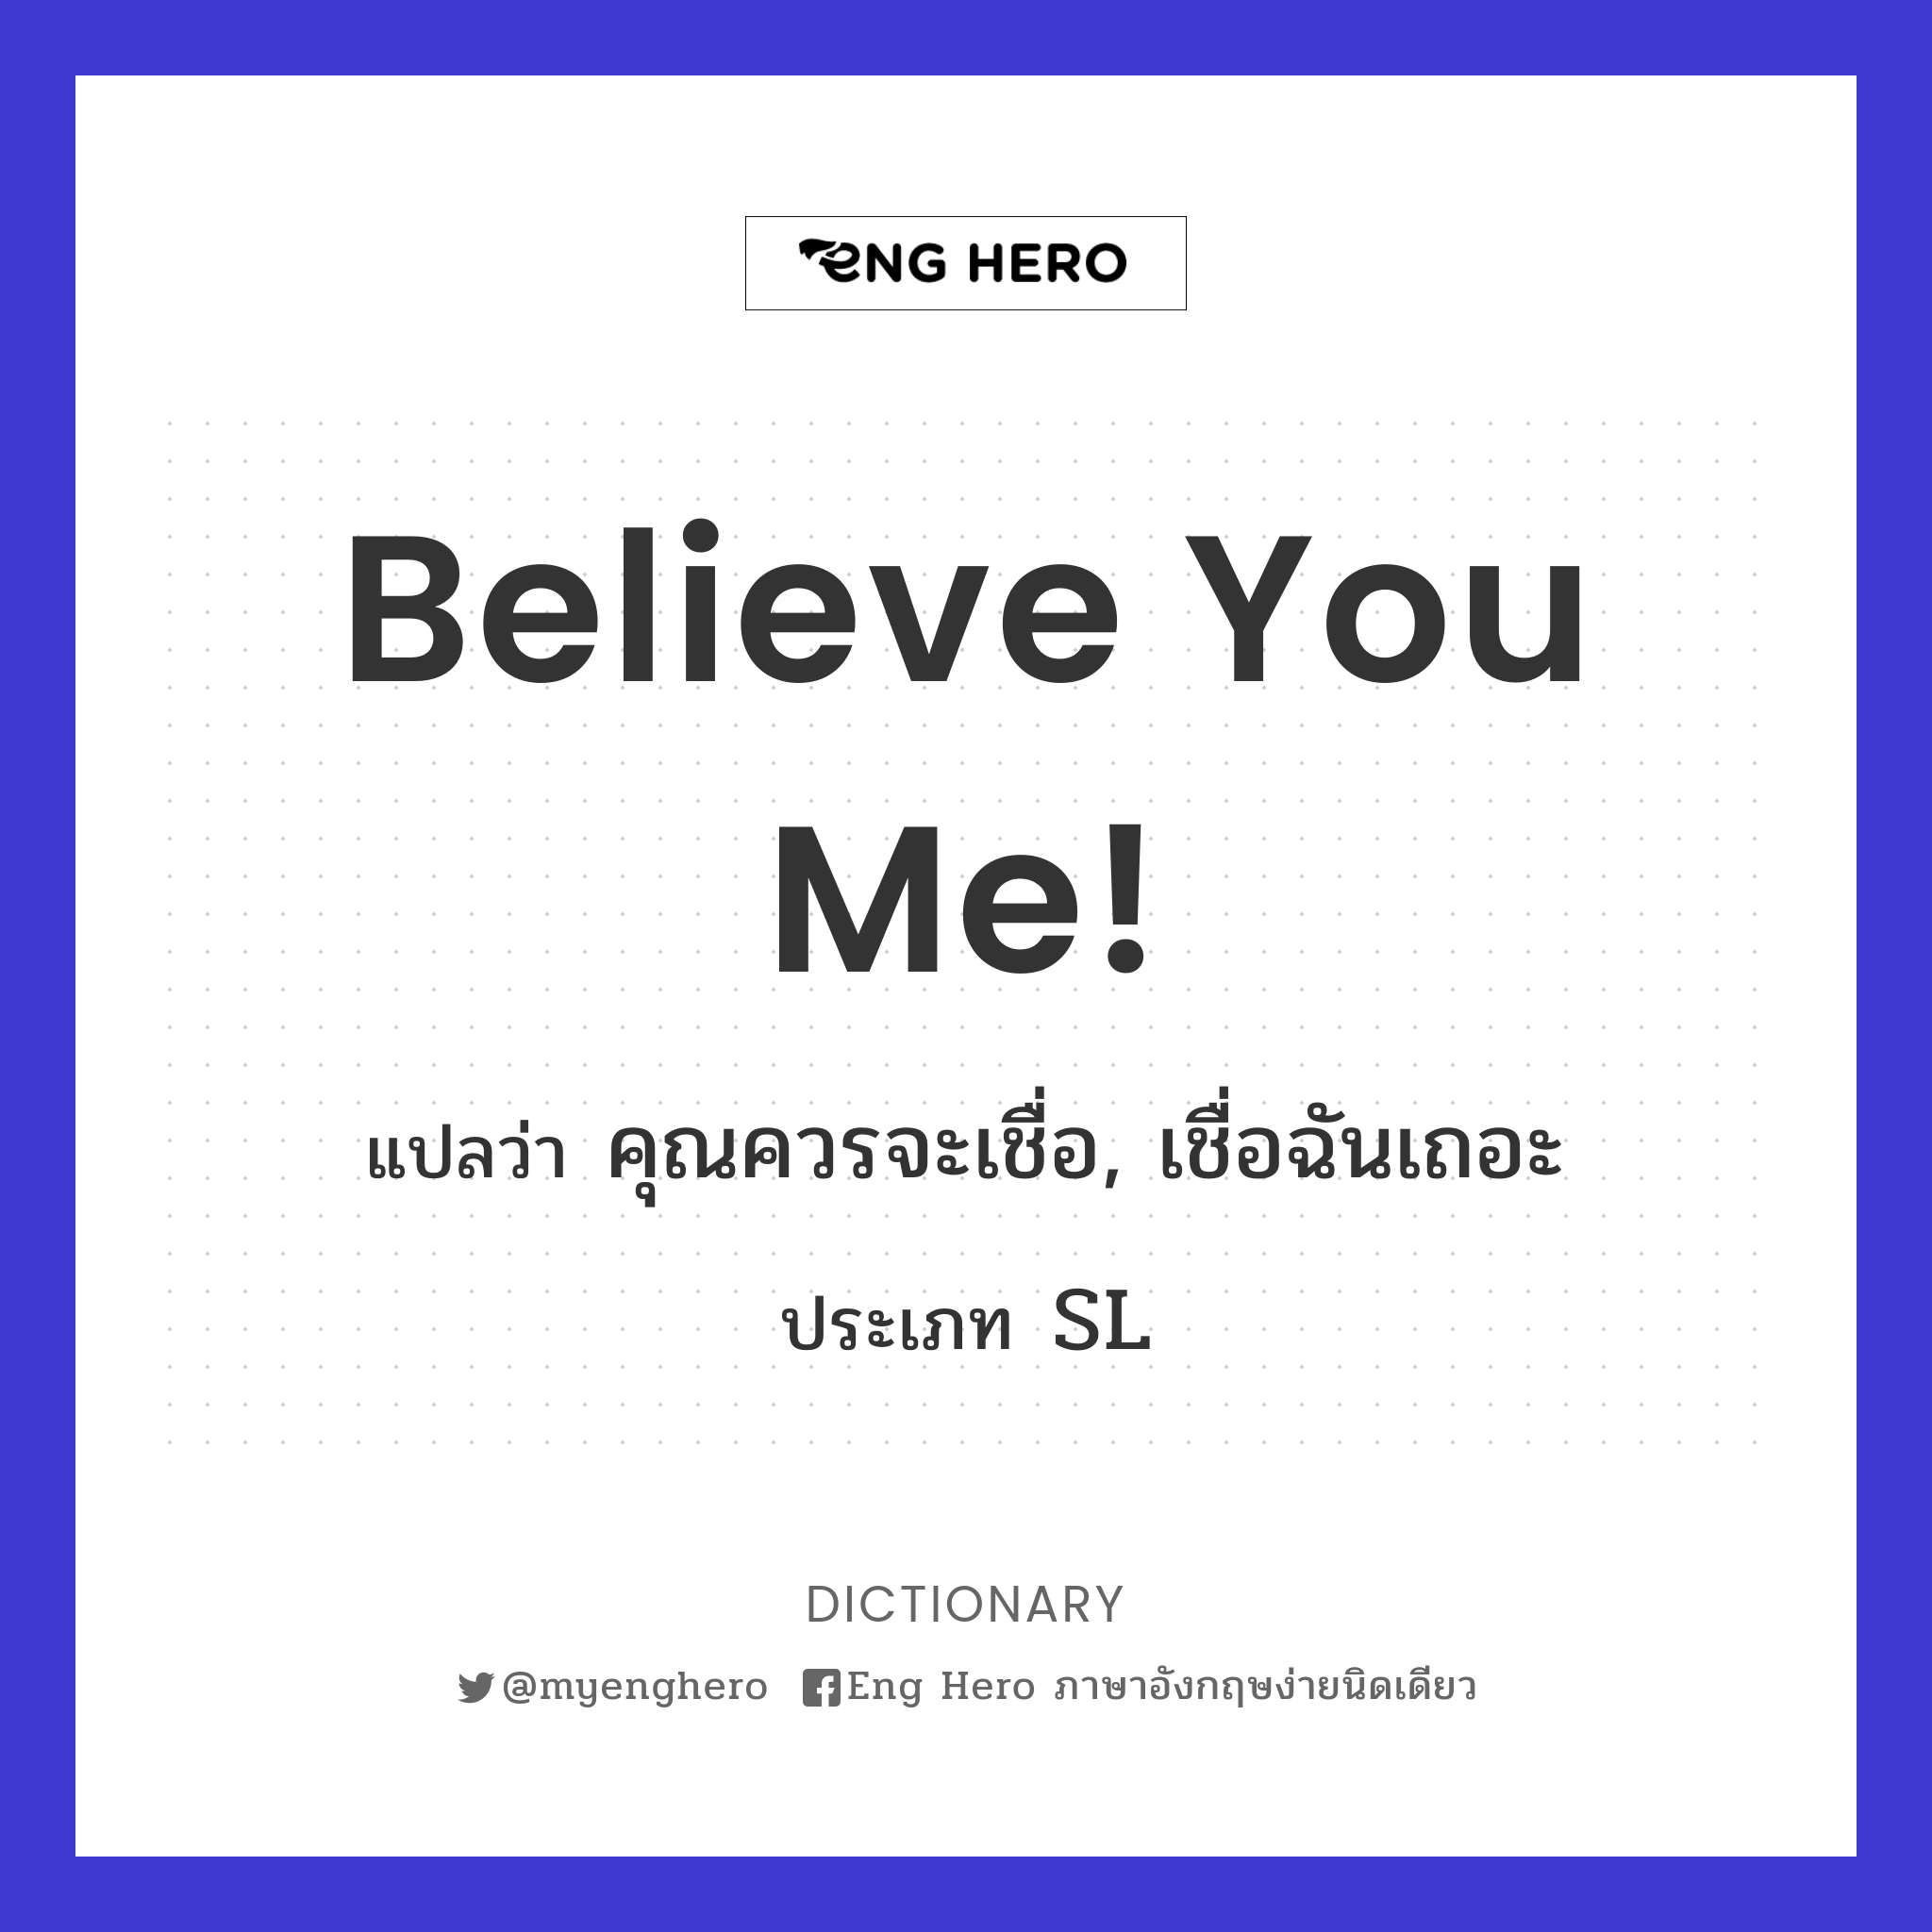 Believe you me!